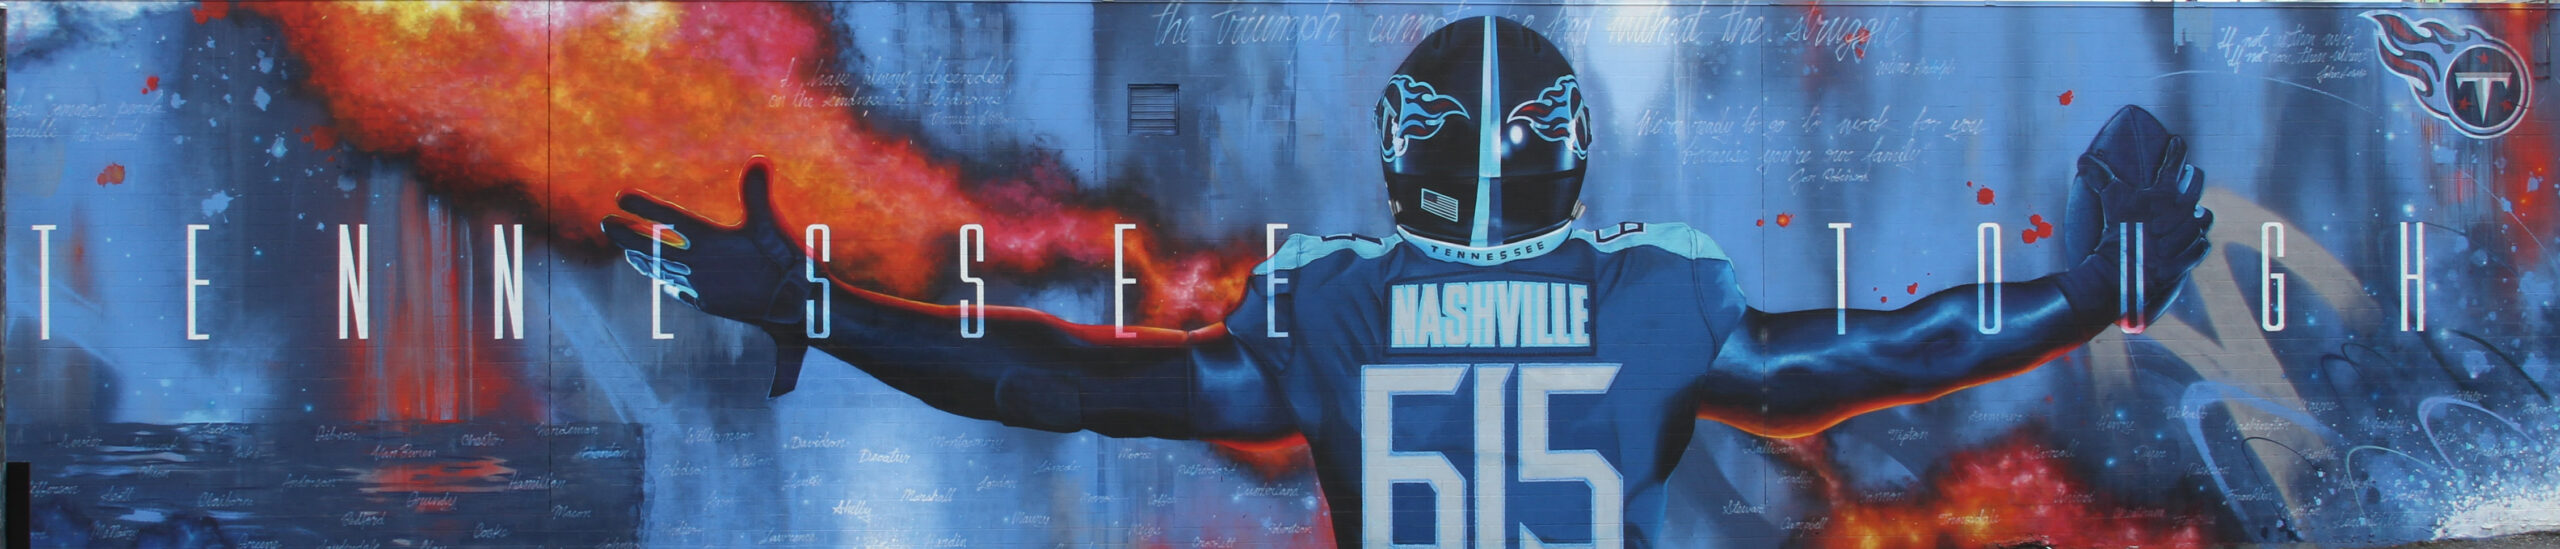 Eric “Mobe” Bass’s mural for the Tennessee Titans in Nashville